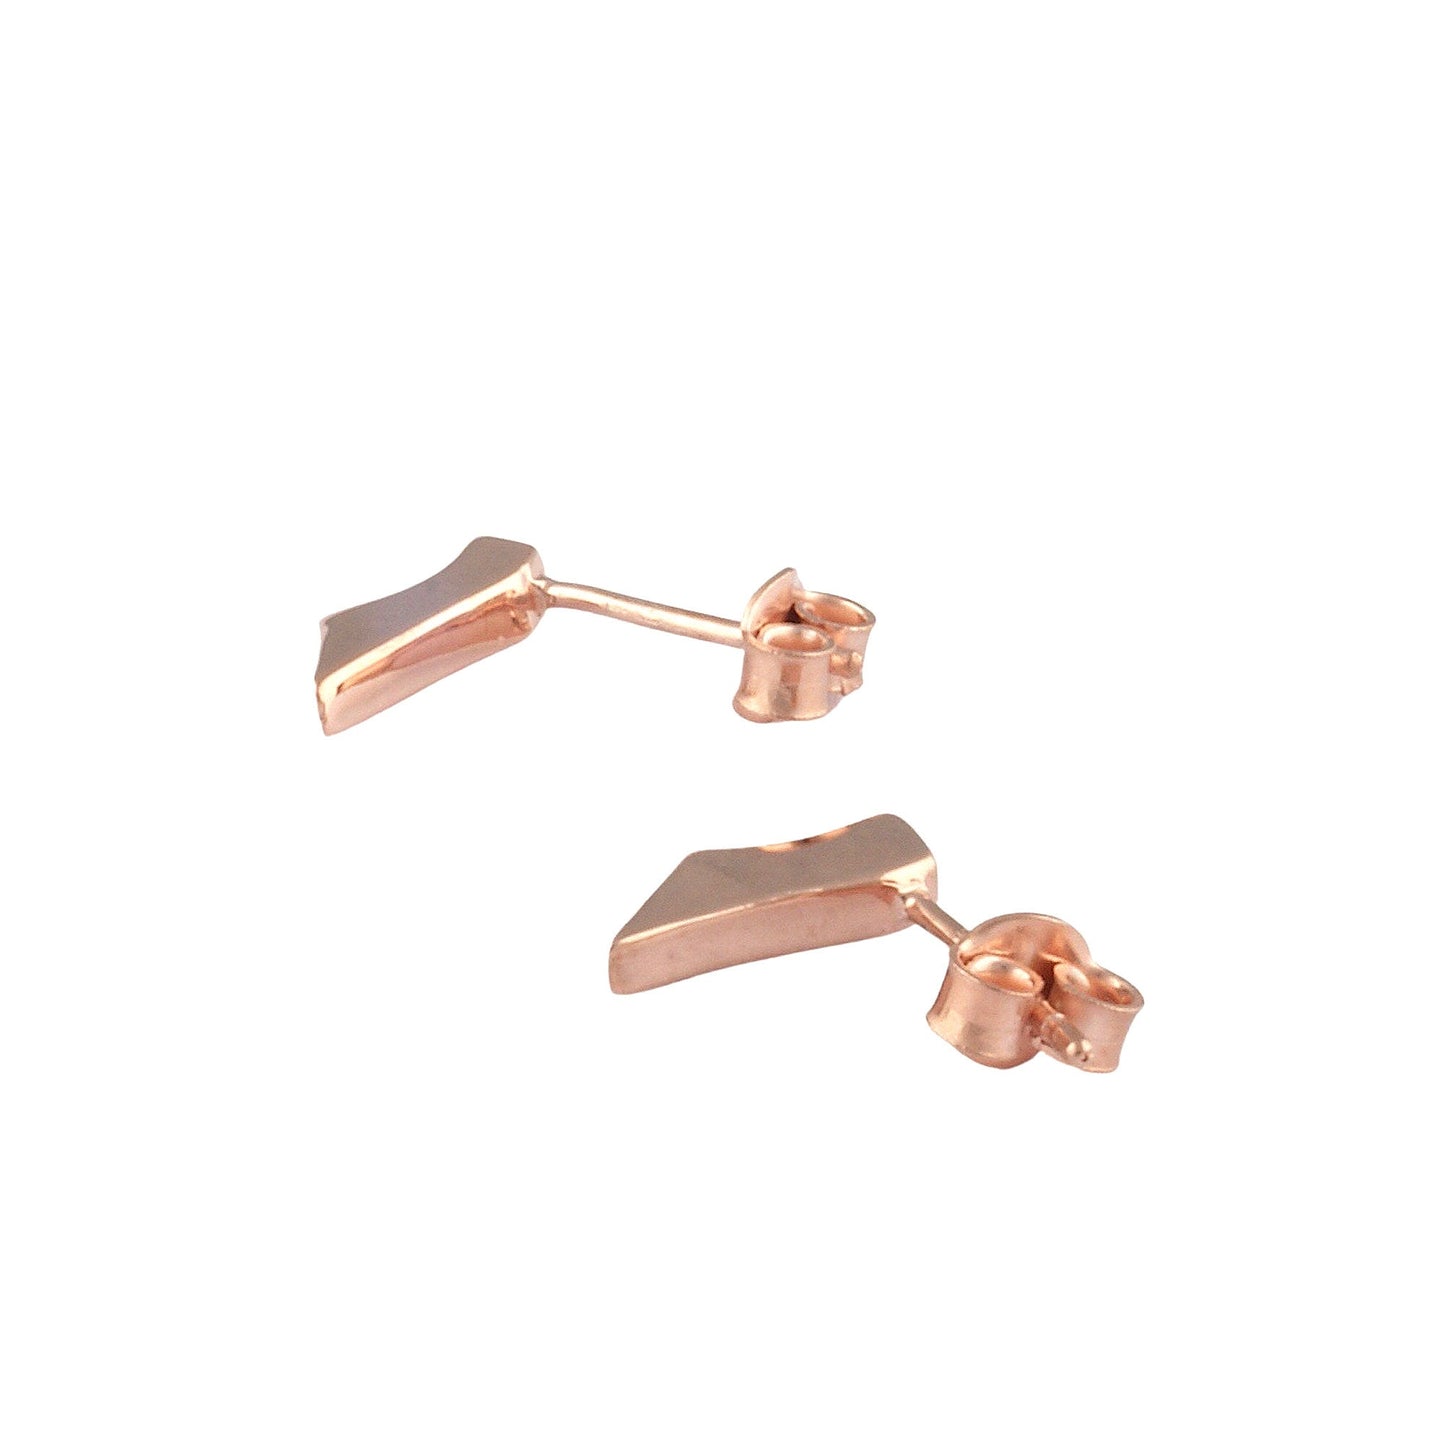 Solid 925 Sterling Silver Geometrical Earrings Push Backs, Birthday Gift, Abstract, Anniversary, Designer, Woman, Girl, Gold , Rose Gold